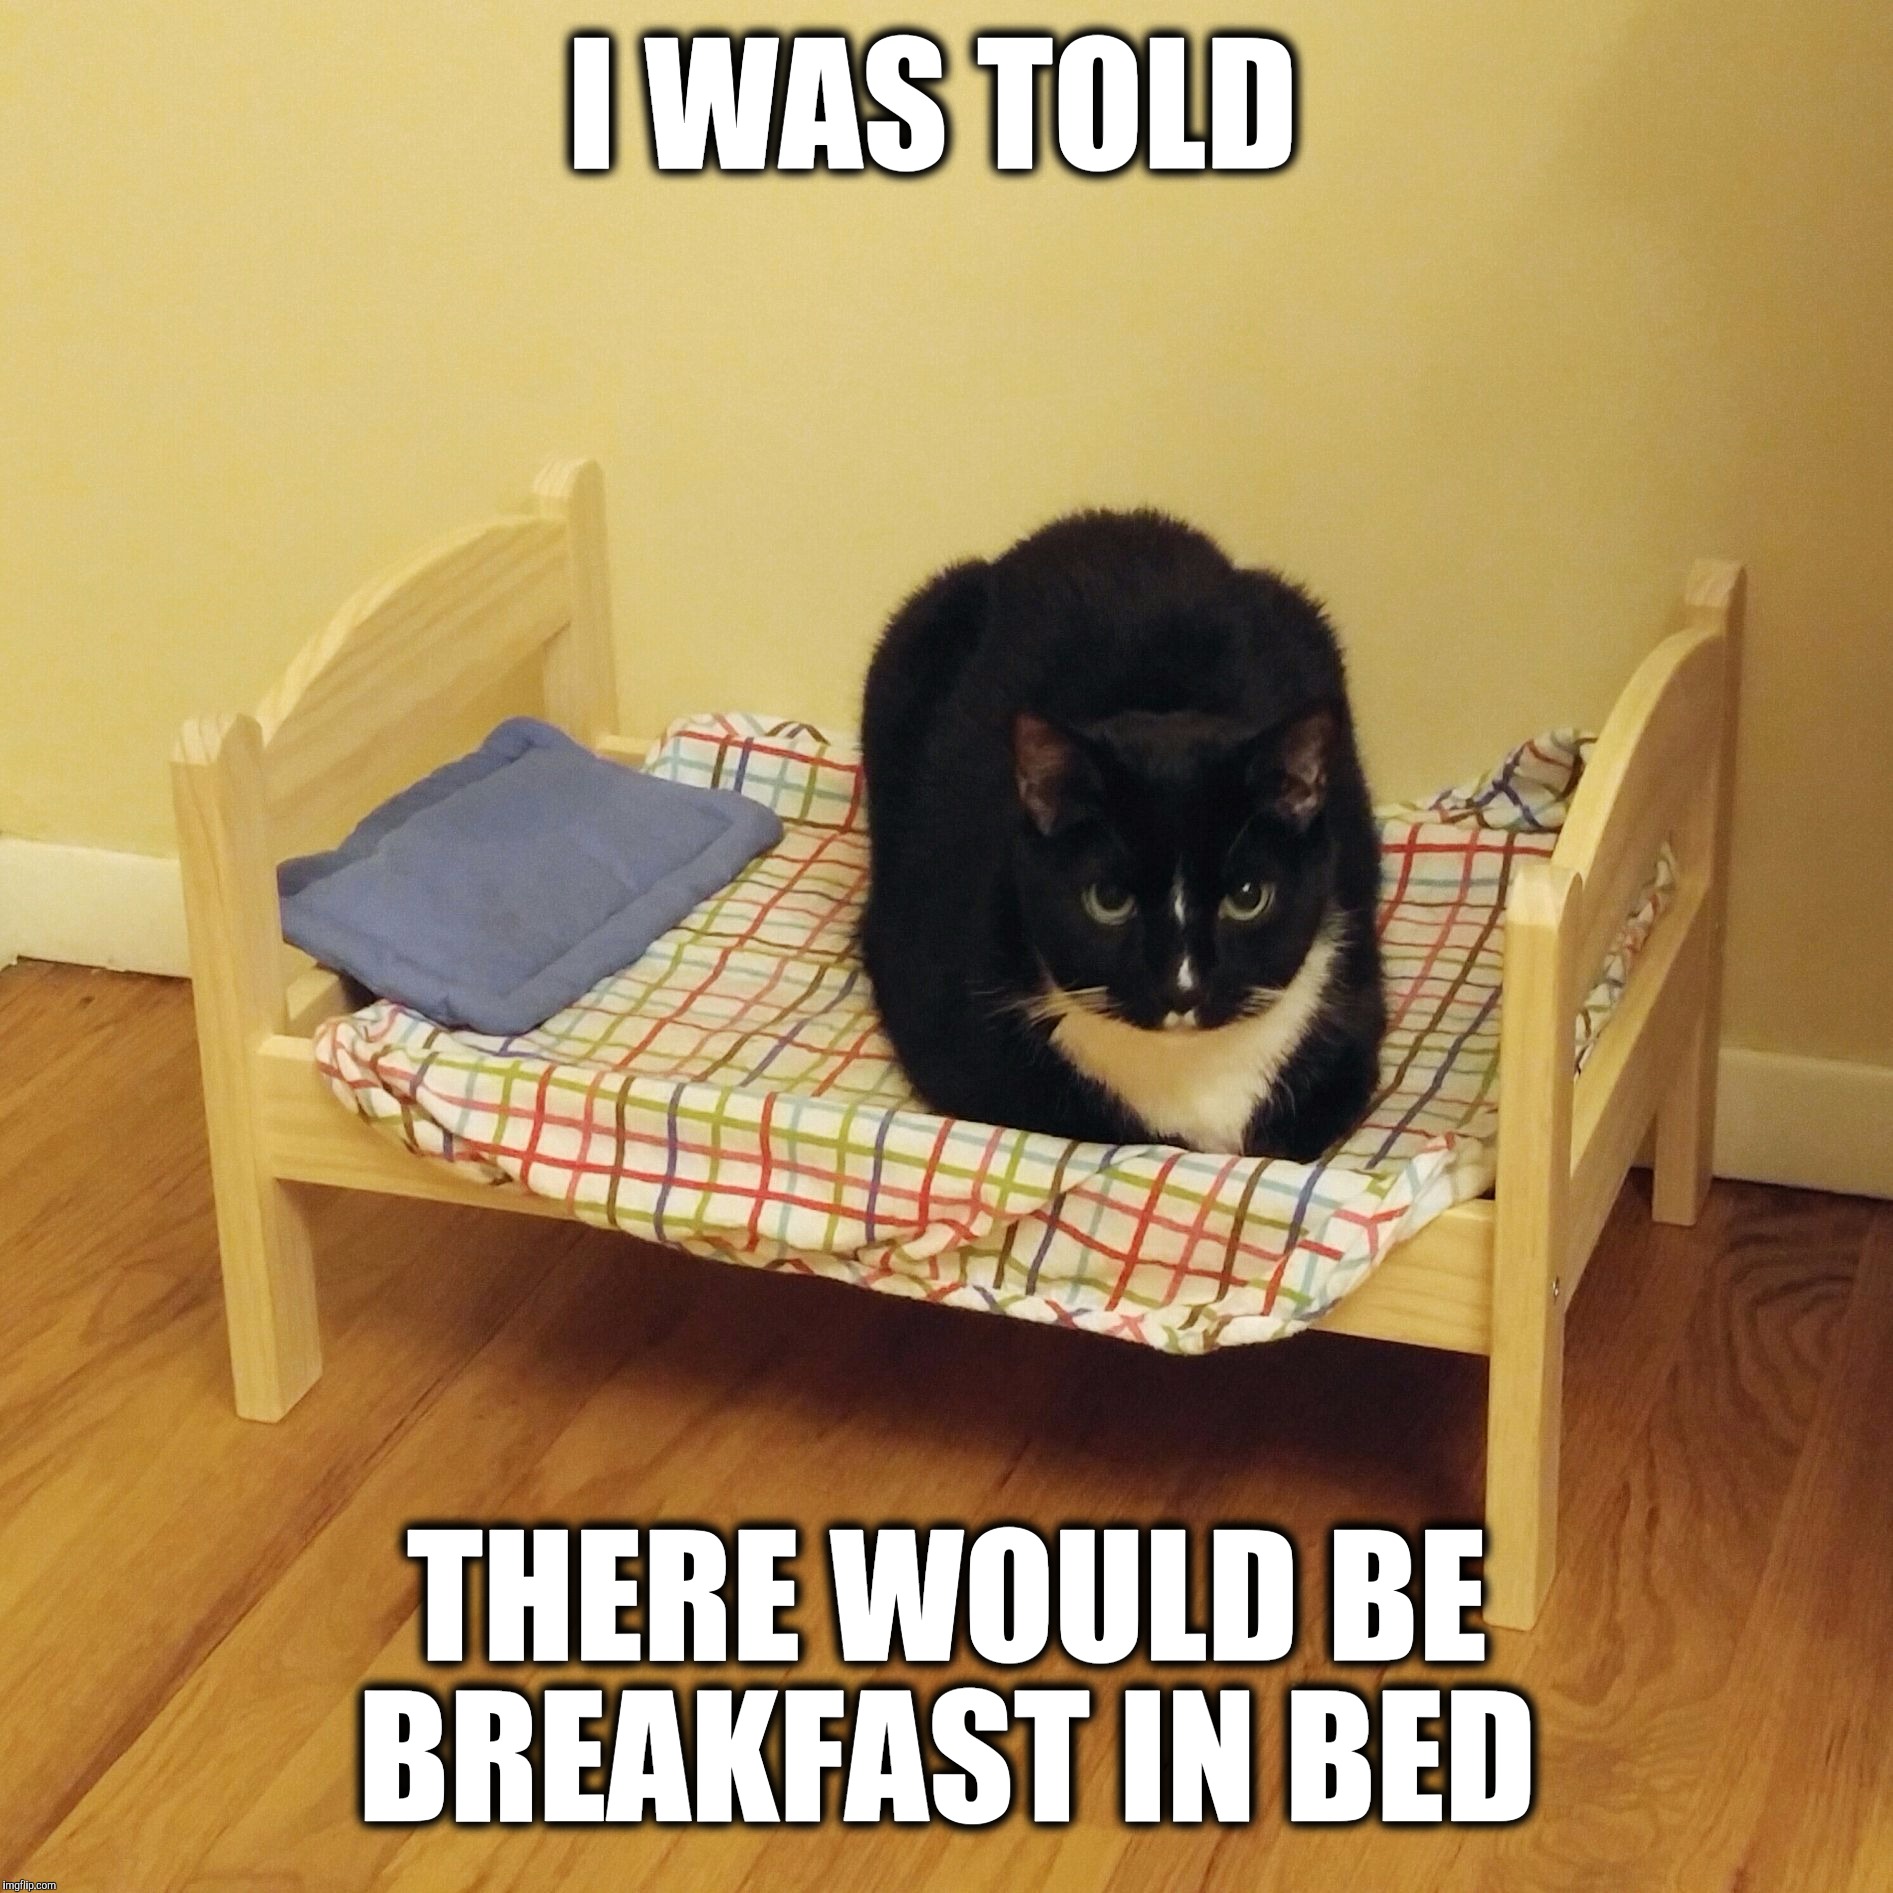 Breakfast in bed  |  I WAS TOLD; THERE WOULD BE BREAKFAST IN BED | image tagged in bert the cat,breakfast,bed,funny cat memes,grumpy,funny | made w/ Imgflip meme maker